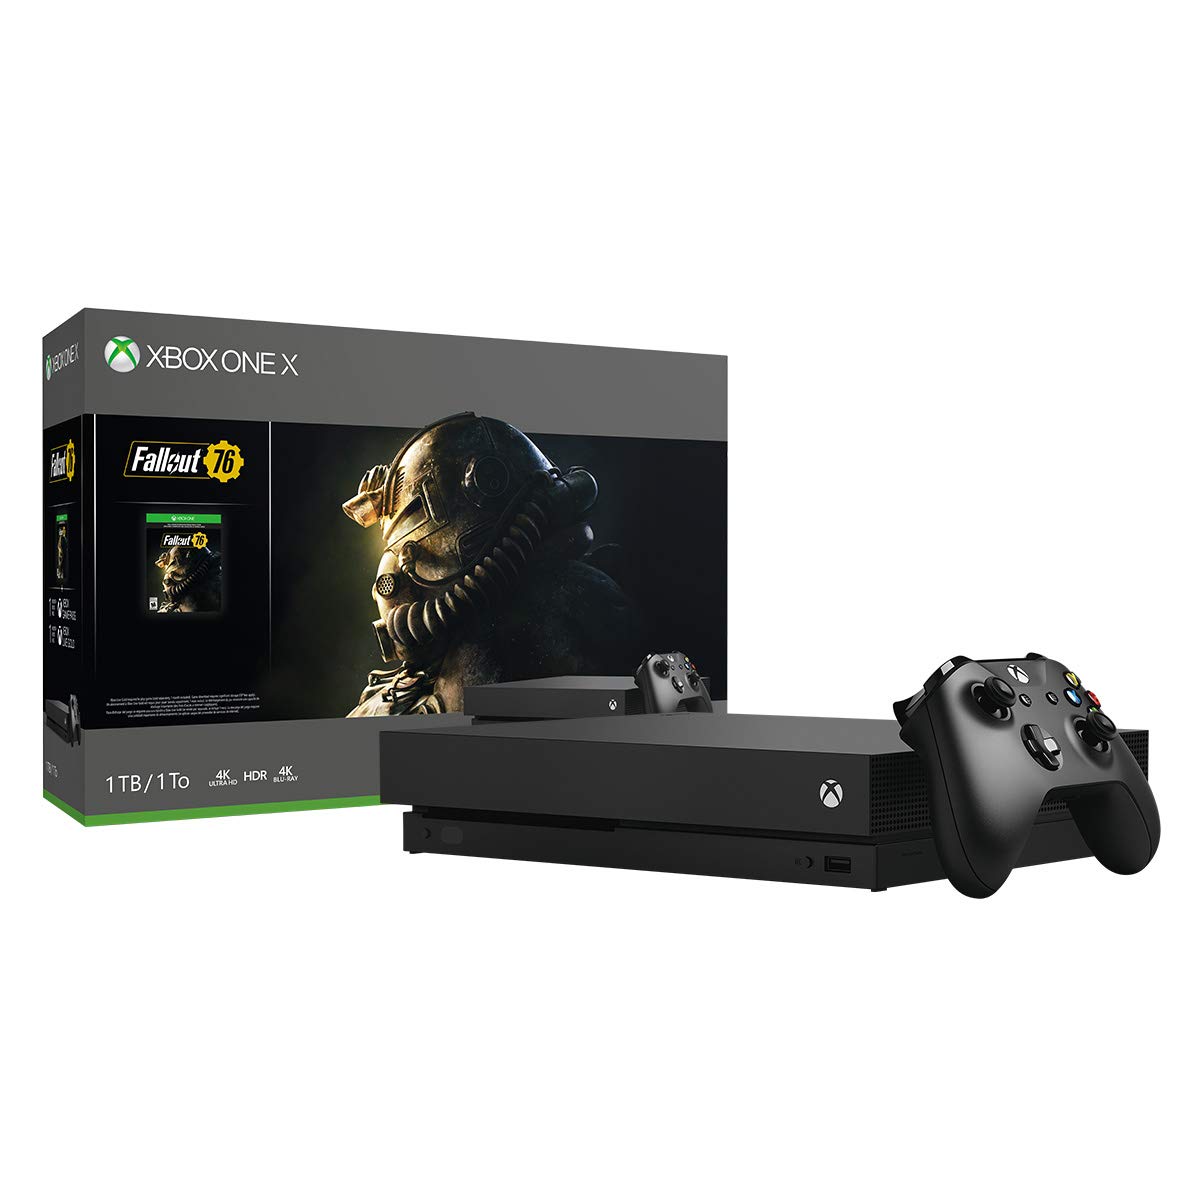 Xbox One X 1TB Console - Fallout 76 Bundle (Discontinued)